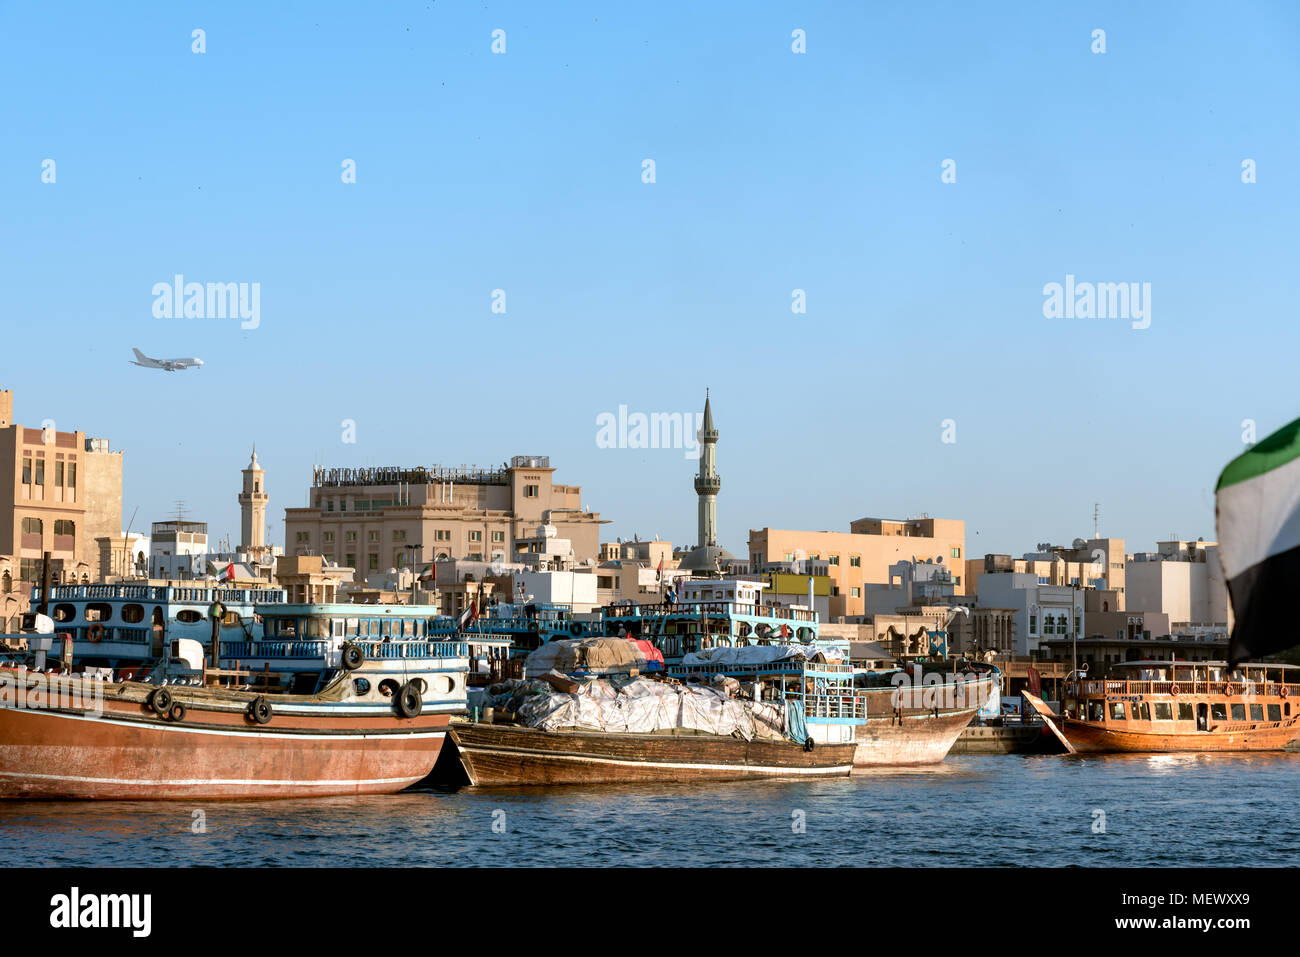 Dhows old wooden sailing vessels are docked along the Deira side of Dubai Creek Stock Photo